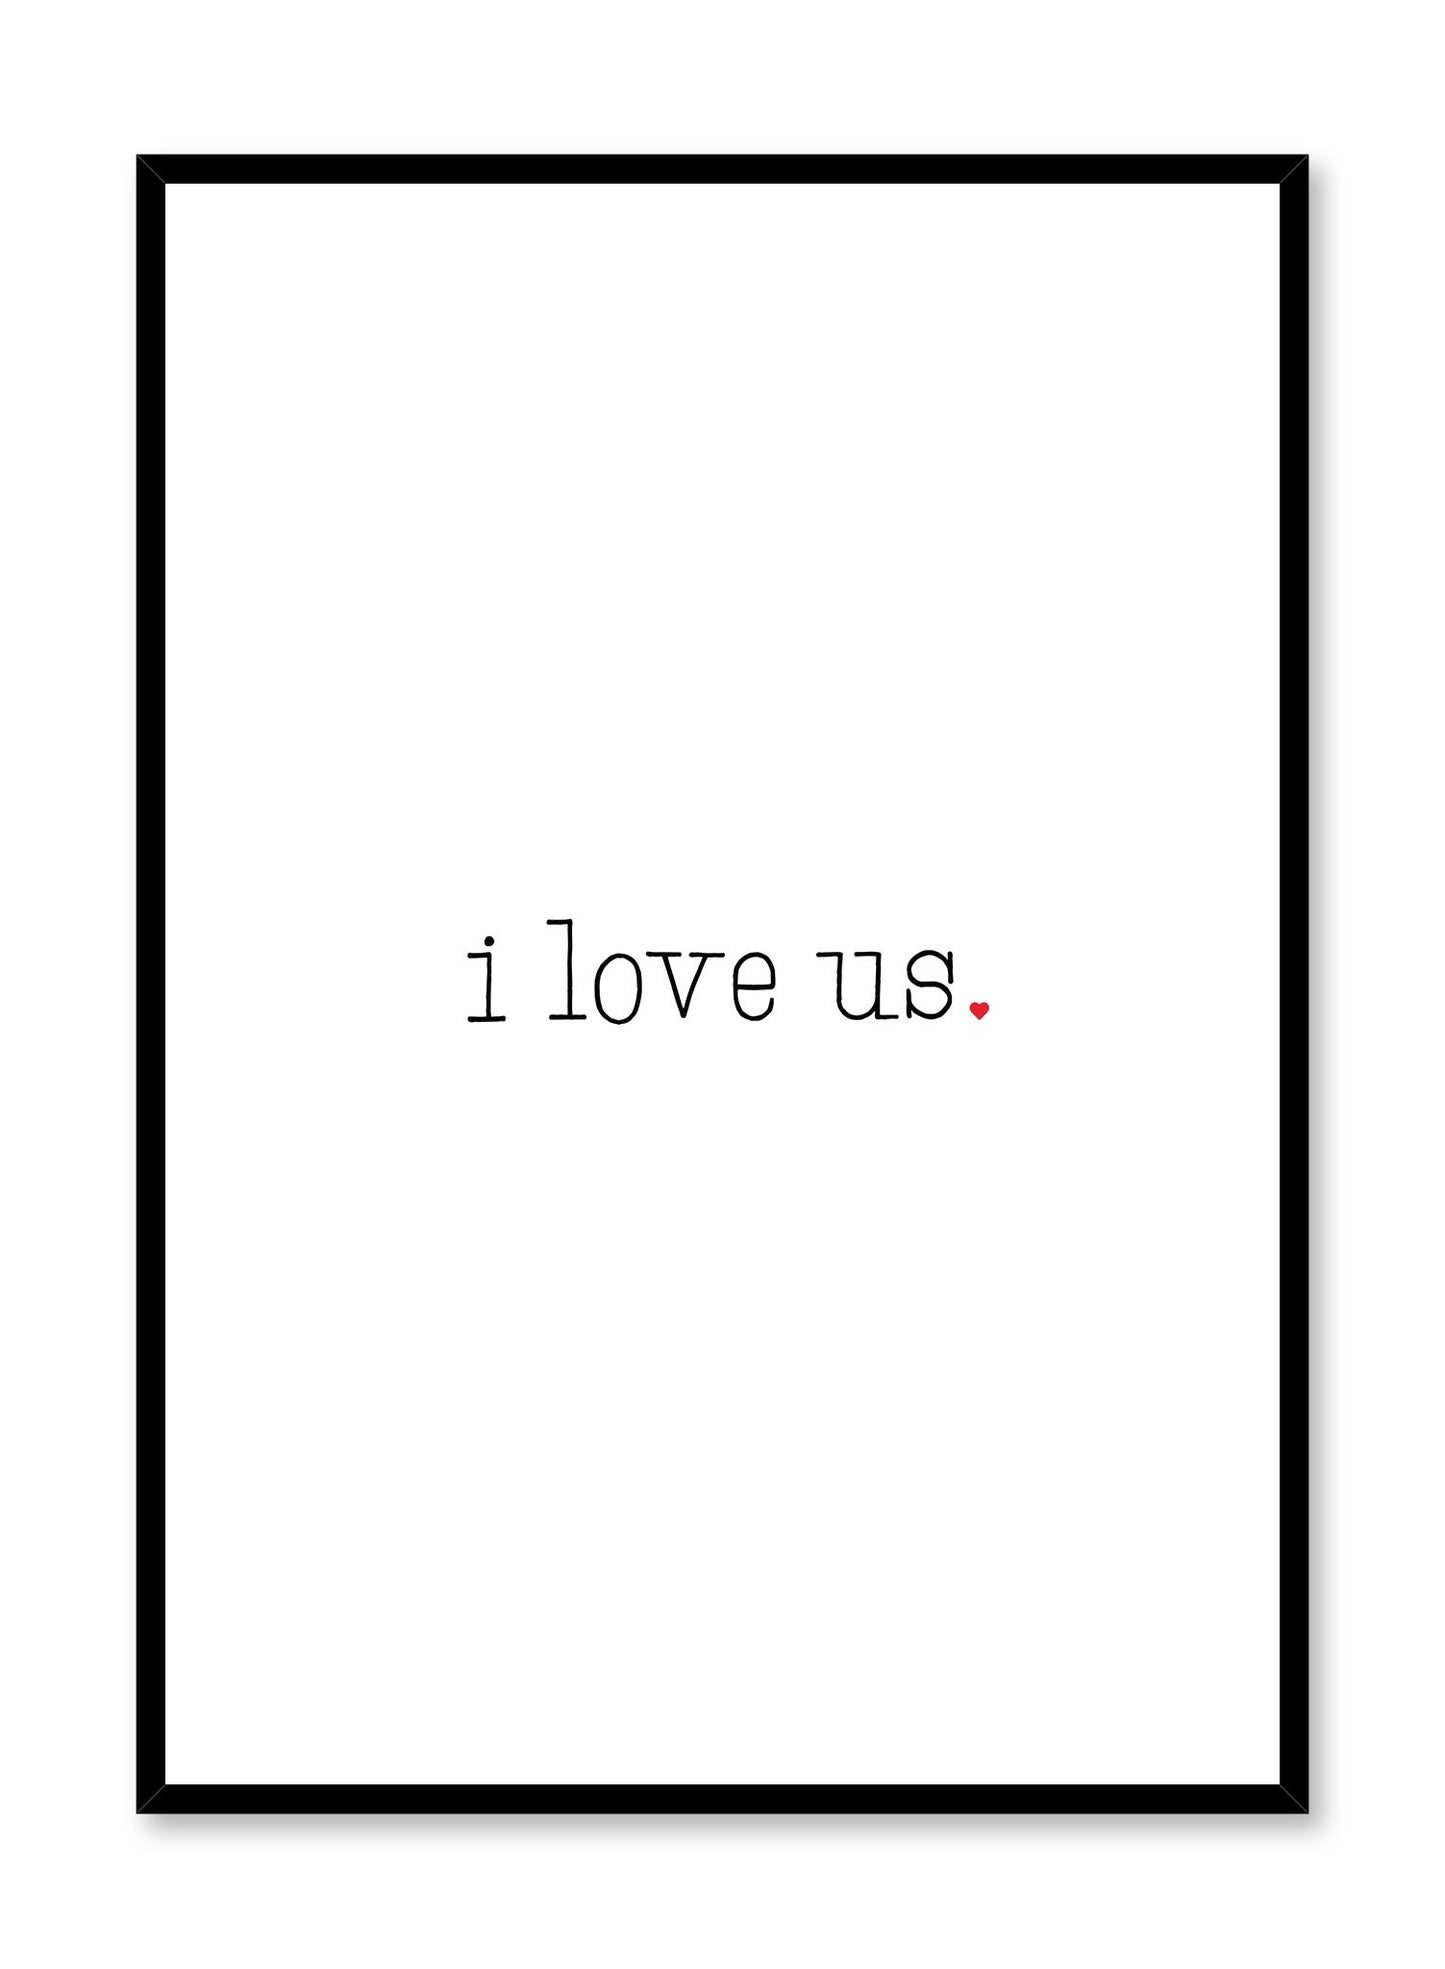 Scandinavian poster with black and white graphic typography design of I Love Us text by Opposite Wall